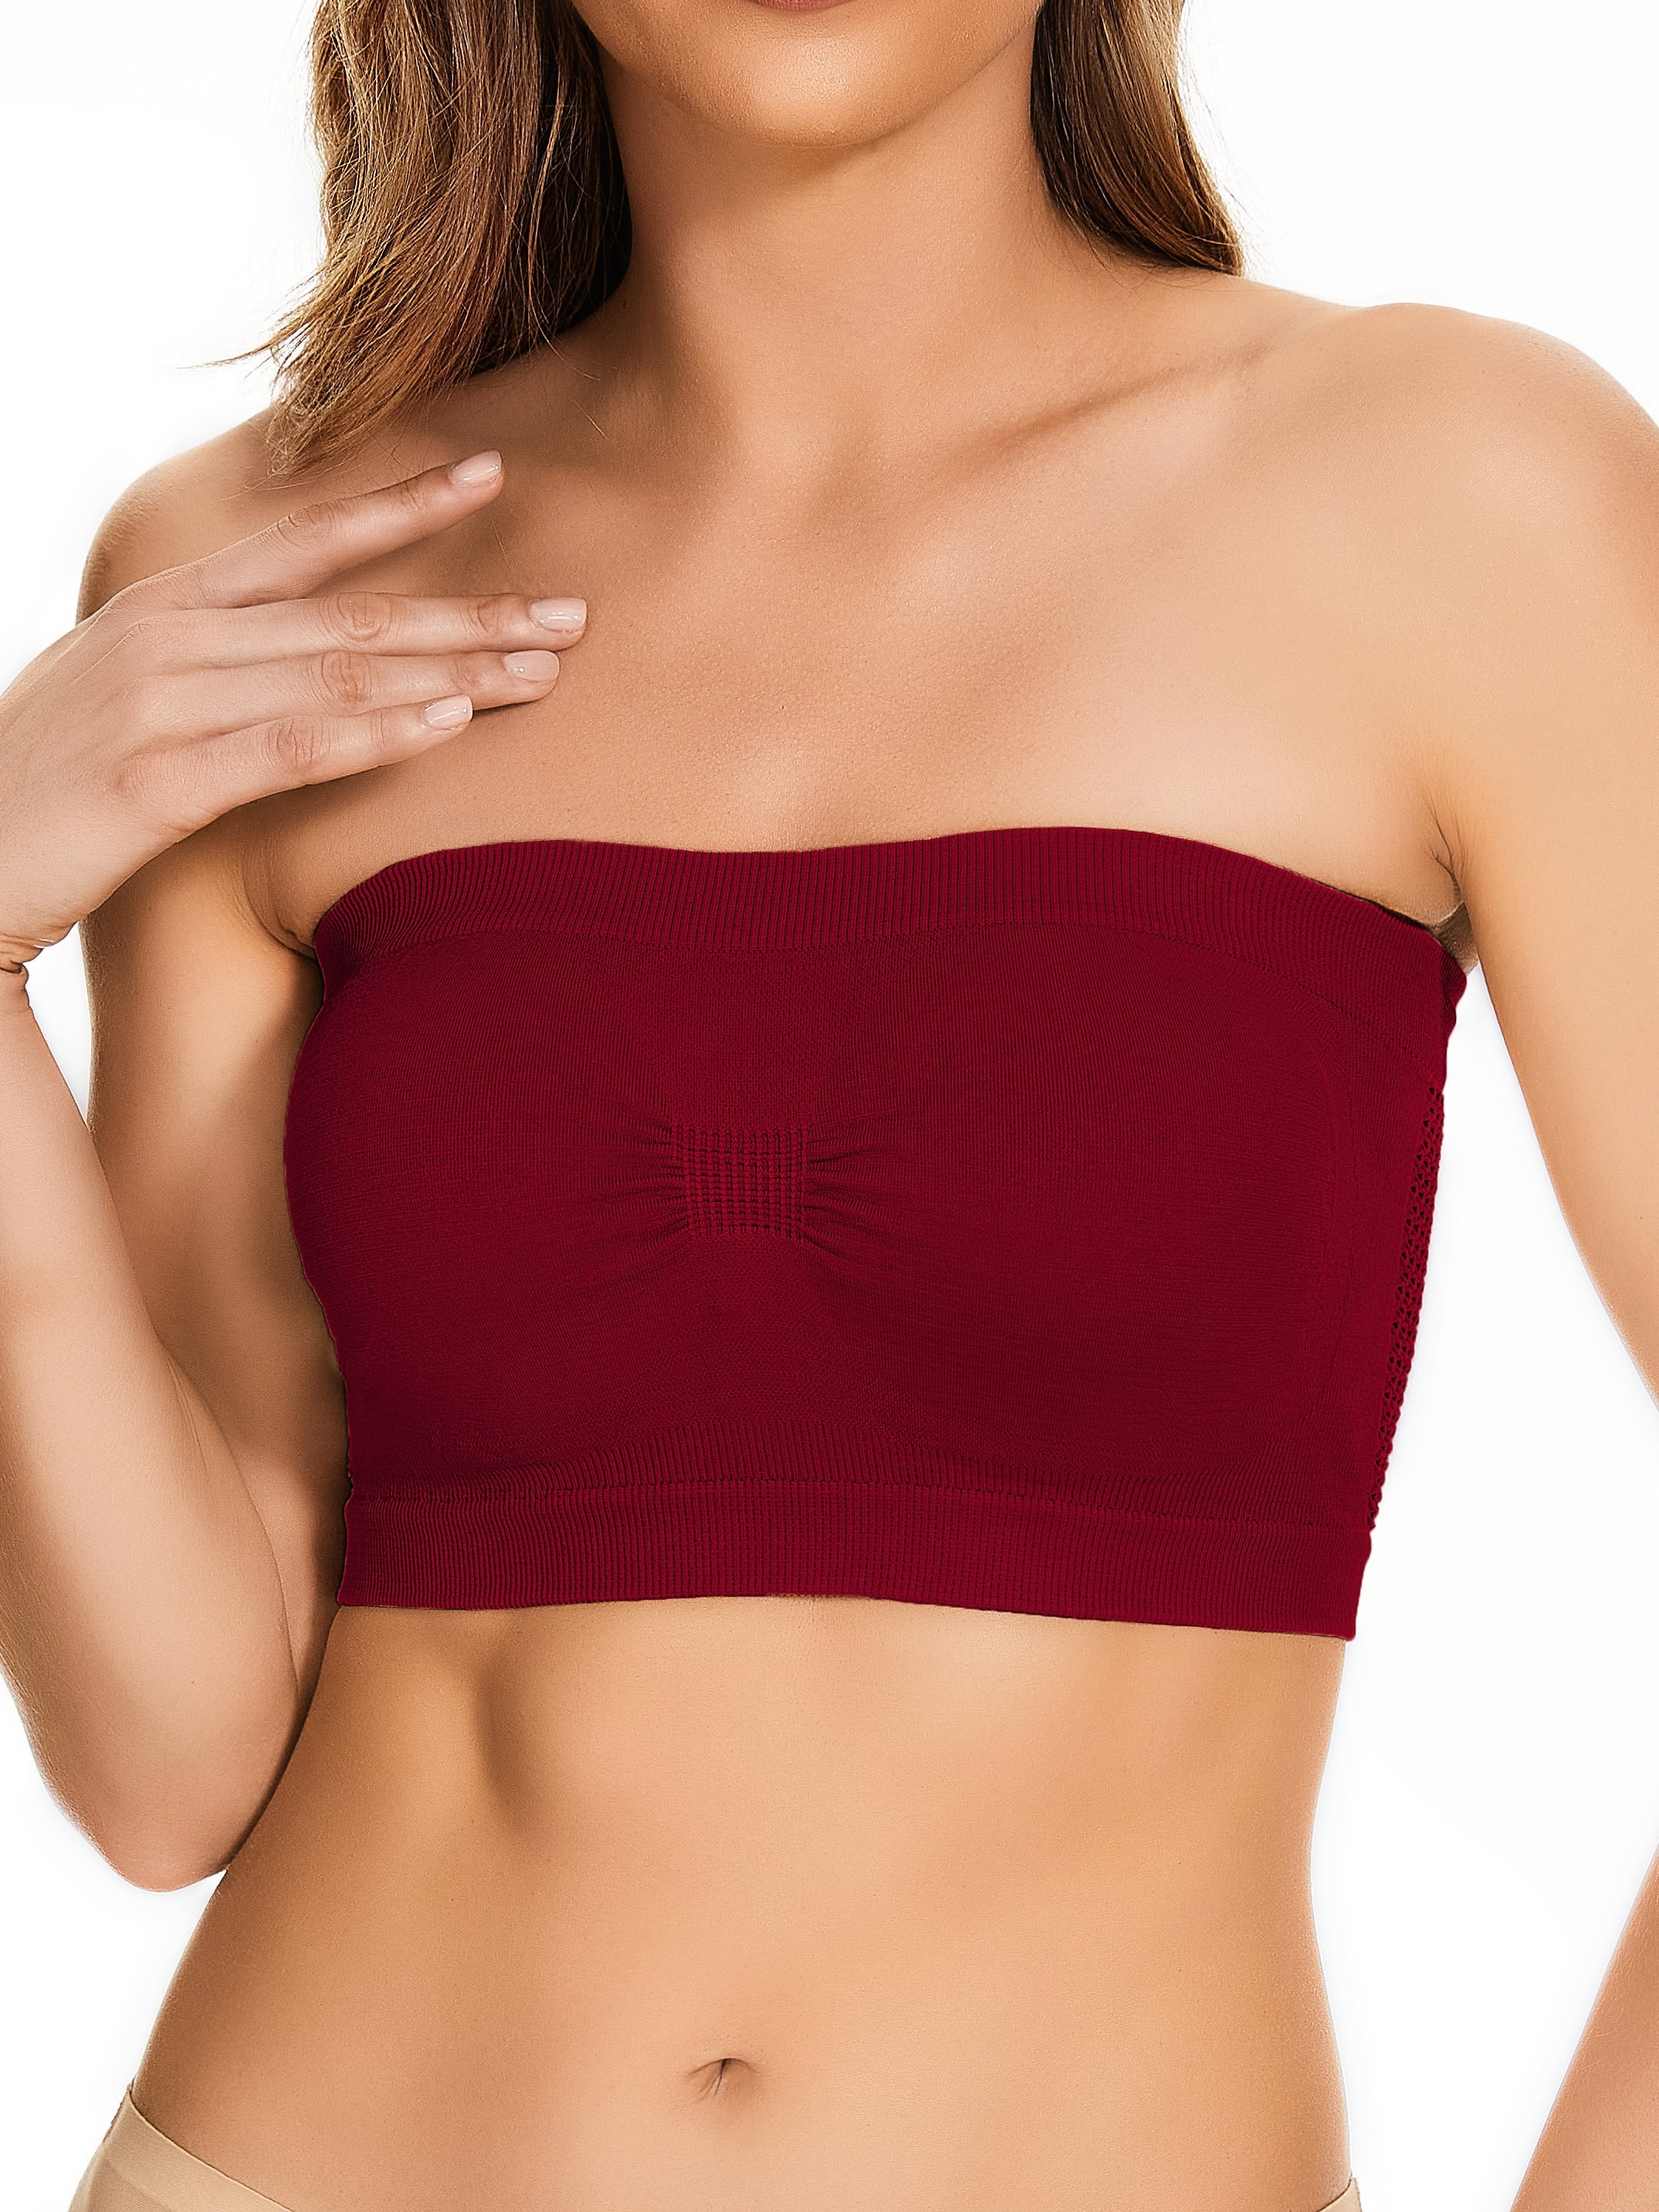  Red Strawberry Cute Faces Strapless Bras for Women Bandeau  Comfort Tube Top with Built in Bra S : Clothing, Shoes & Jewelry